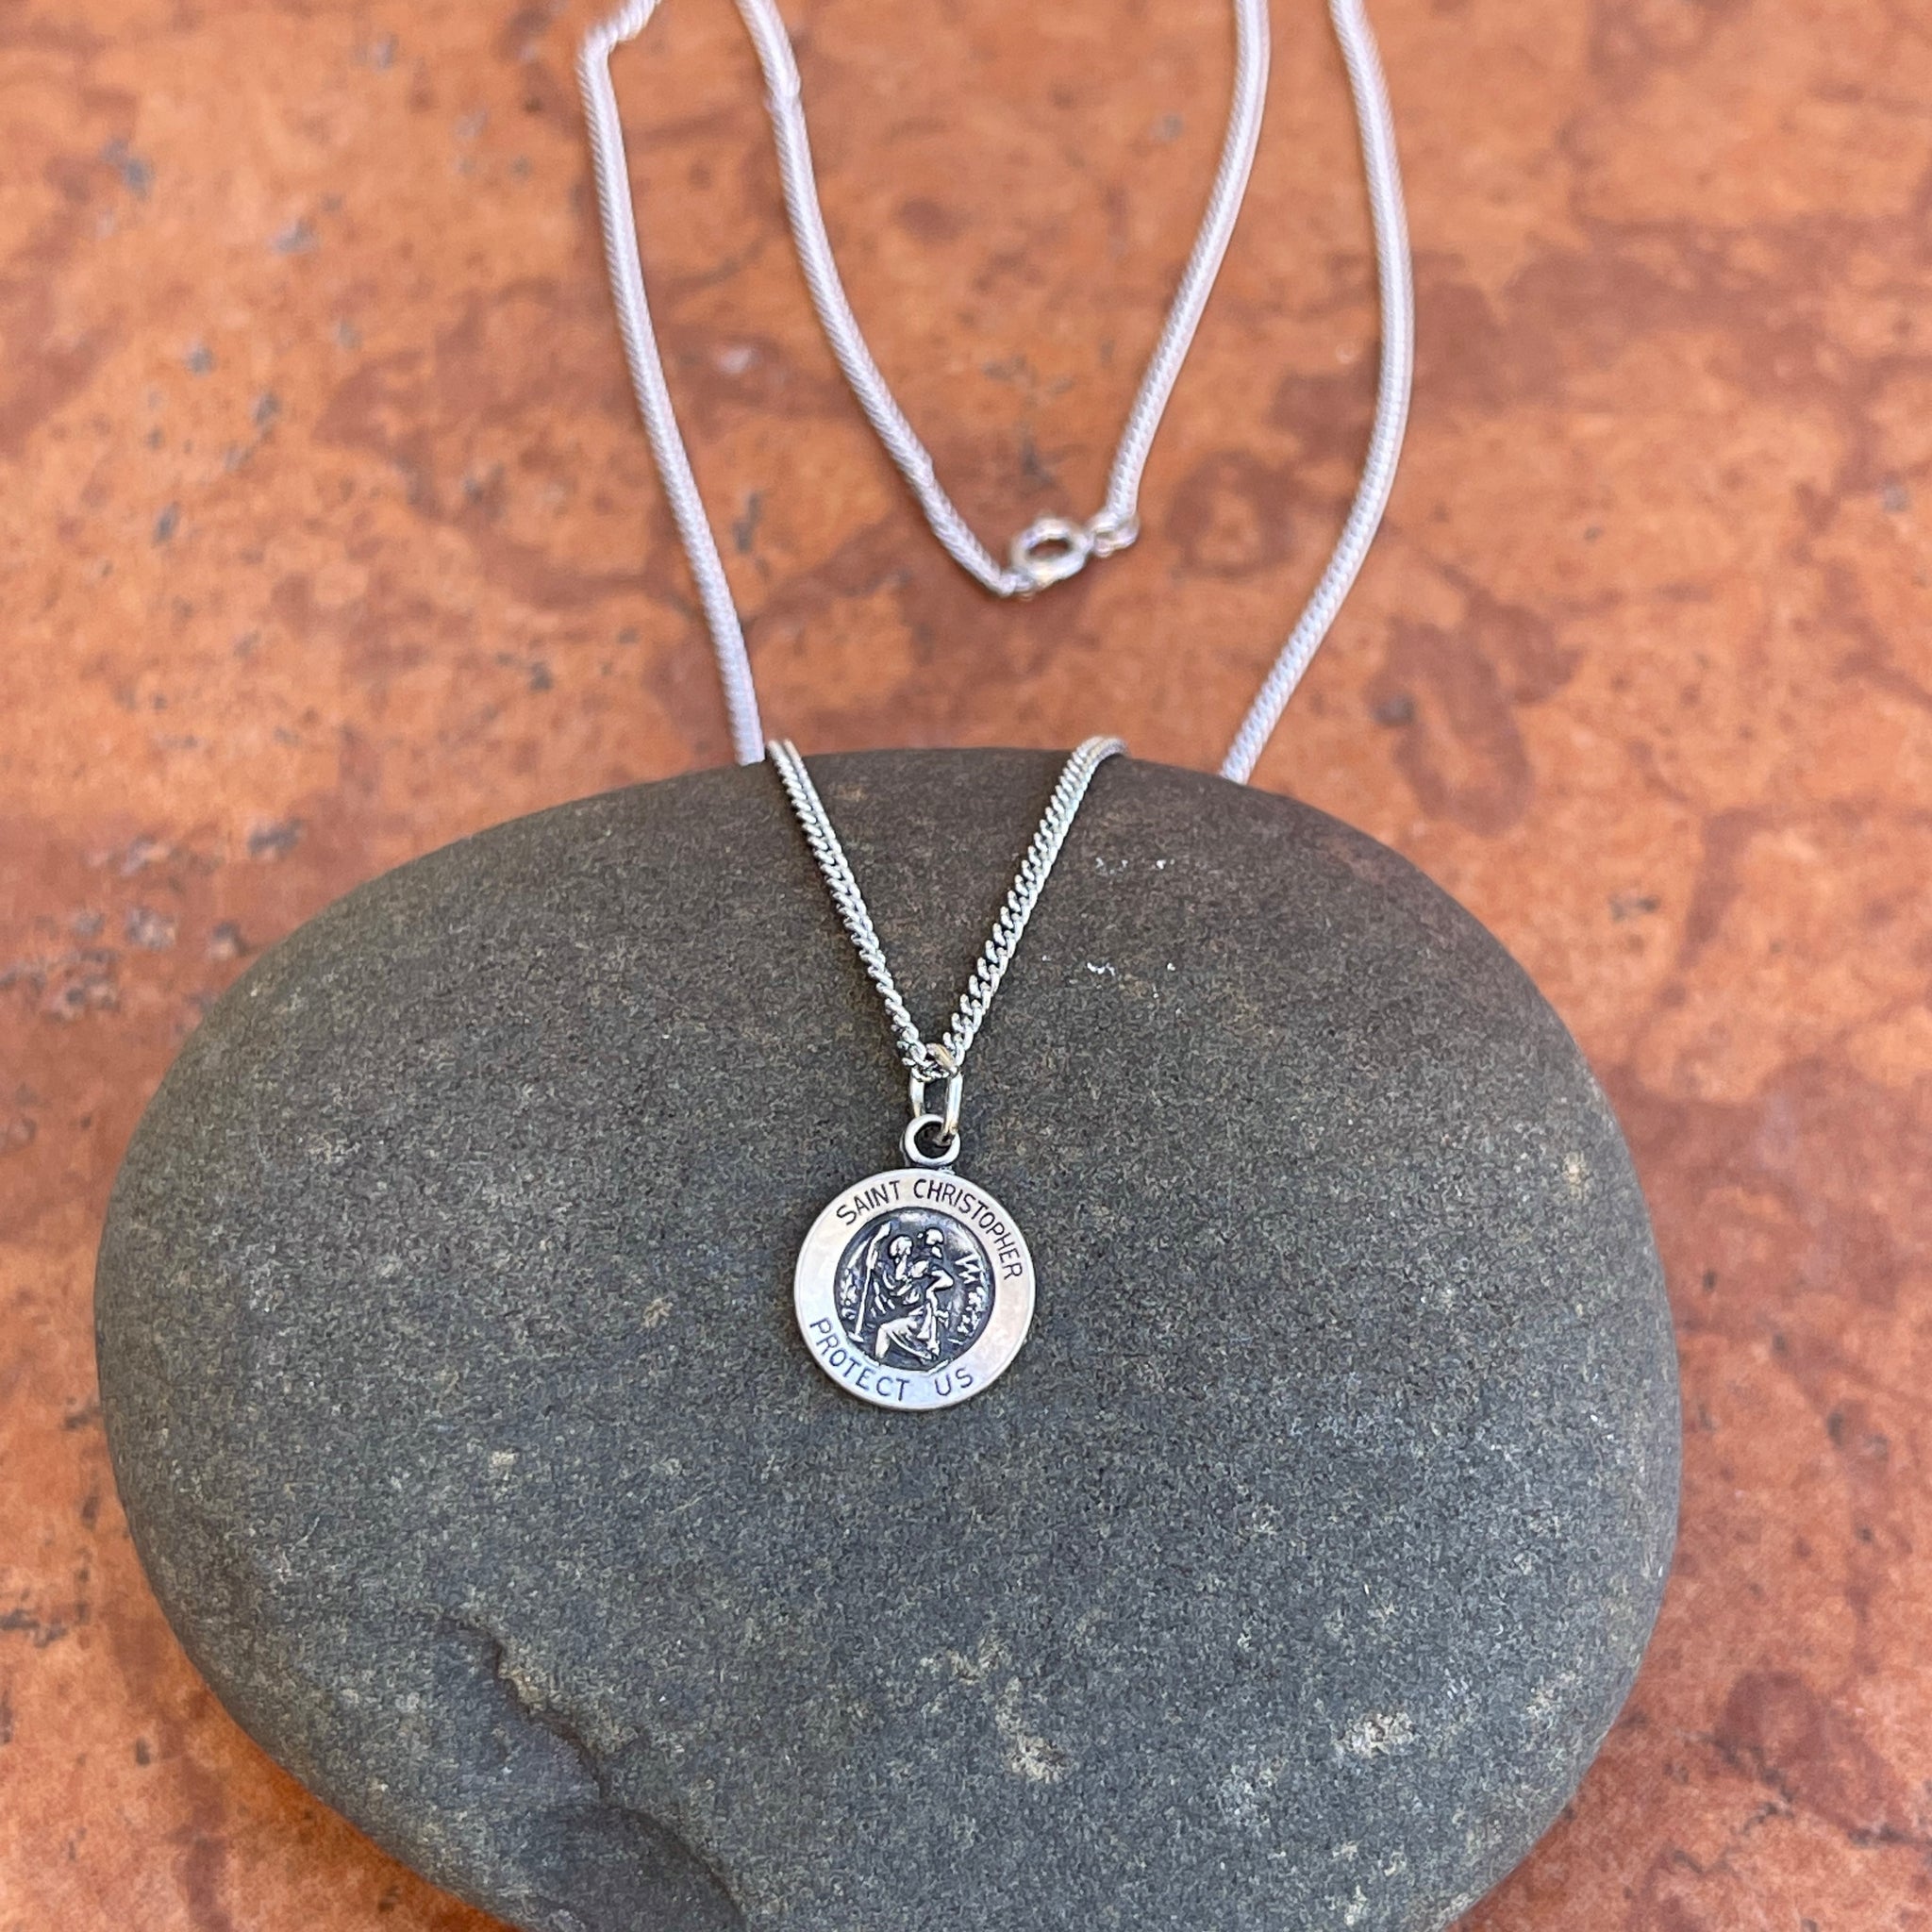 Sterling Silver Coin Necklace, Tiny Silver Medallion Necklace for